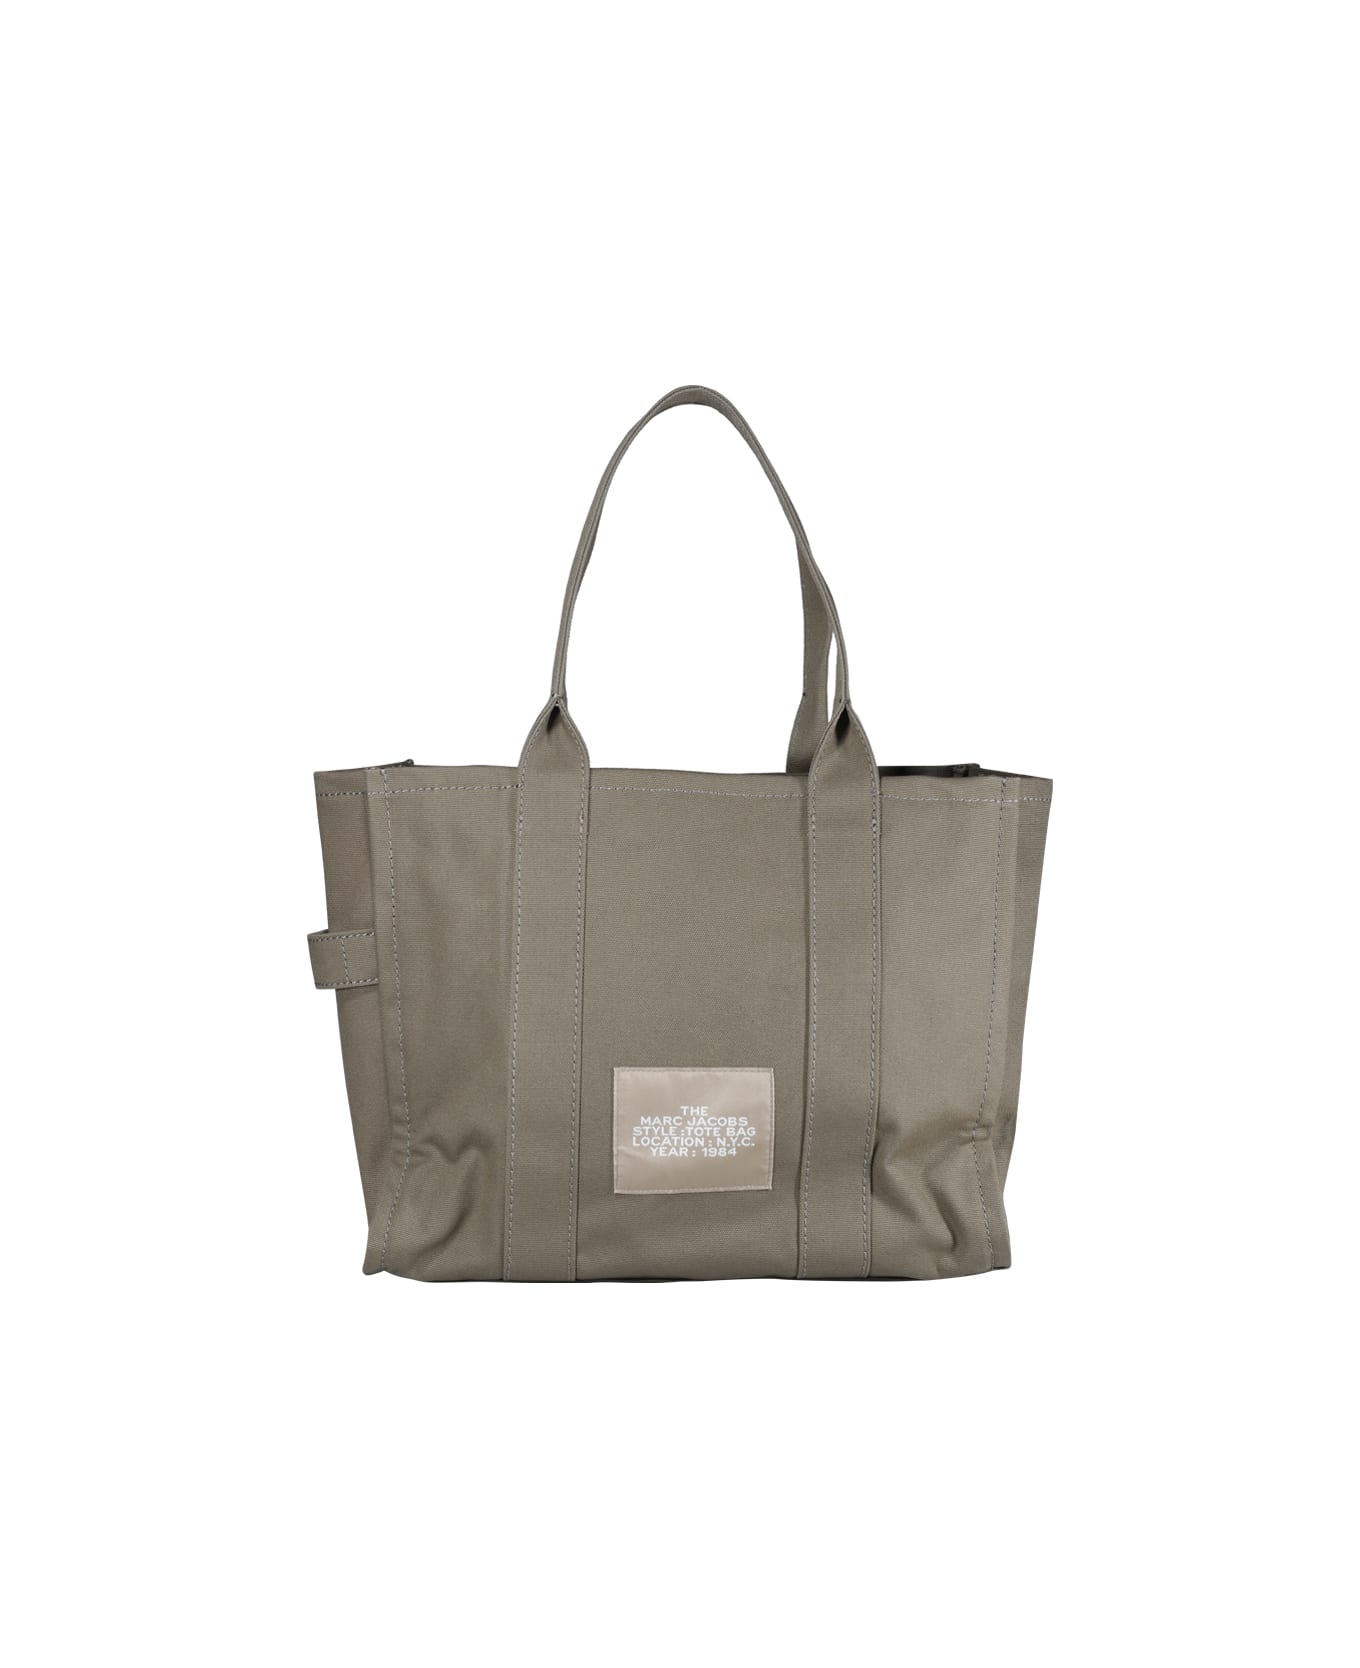 Marc Jacobs The Large Tote Bag - Slate green トートバッグ